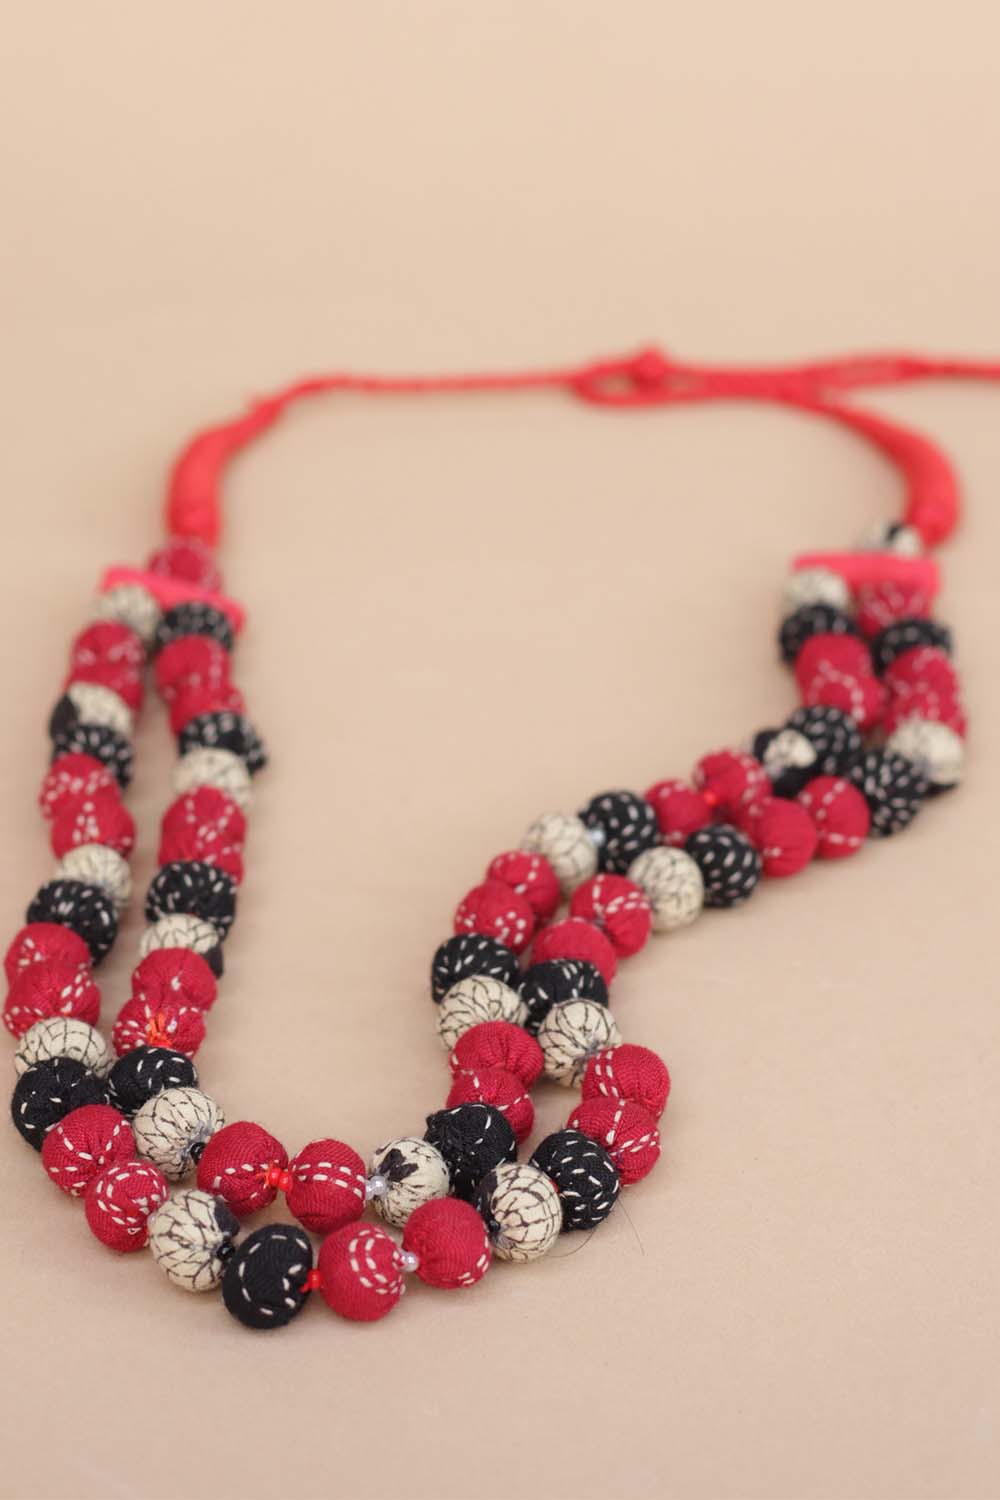 Ethnic Handcrafted Red & Black Threaded Dokra Necklace - Ganesh in Kul -  ArtisanSoul